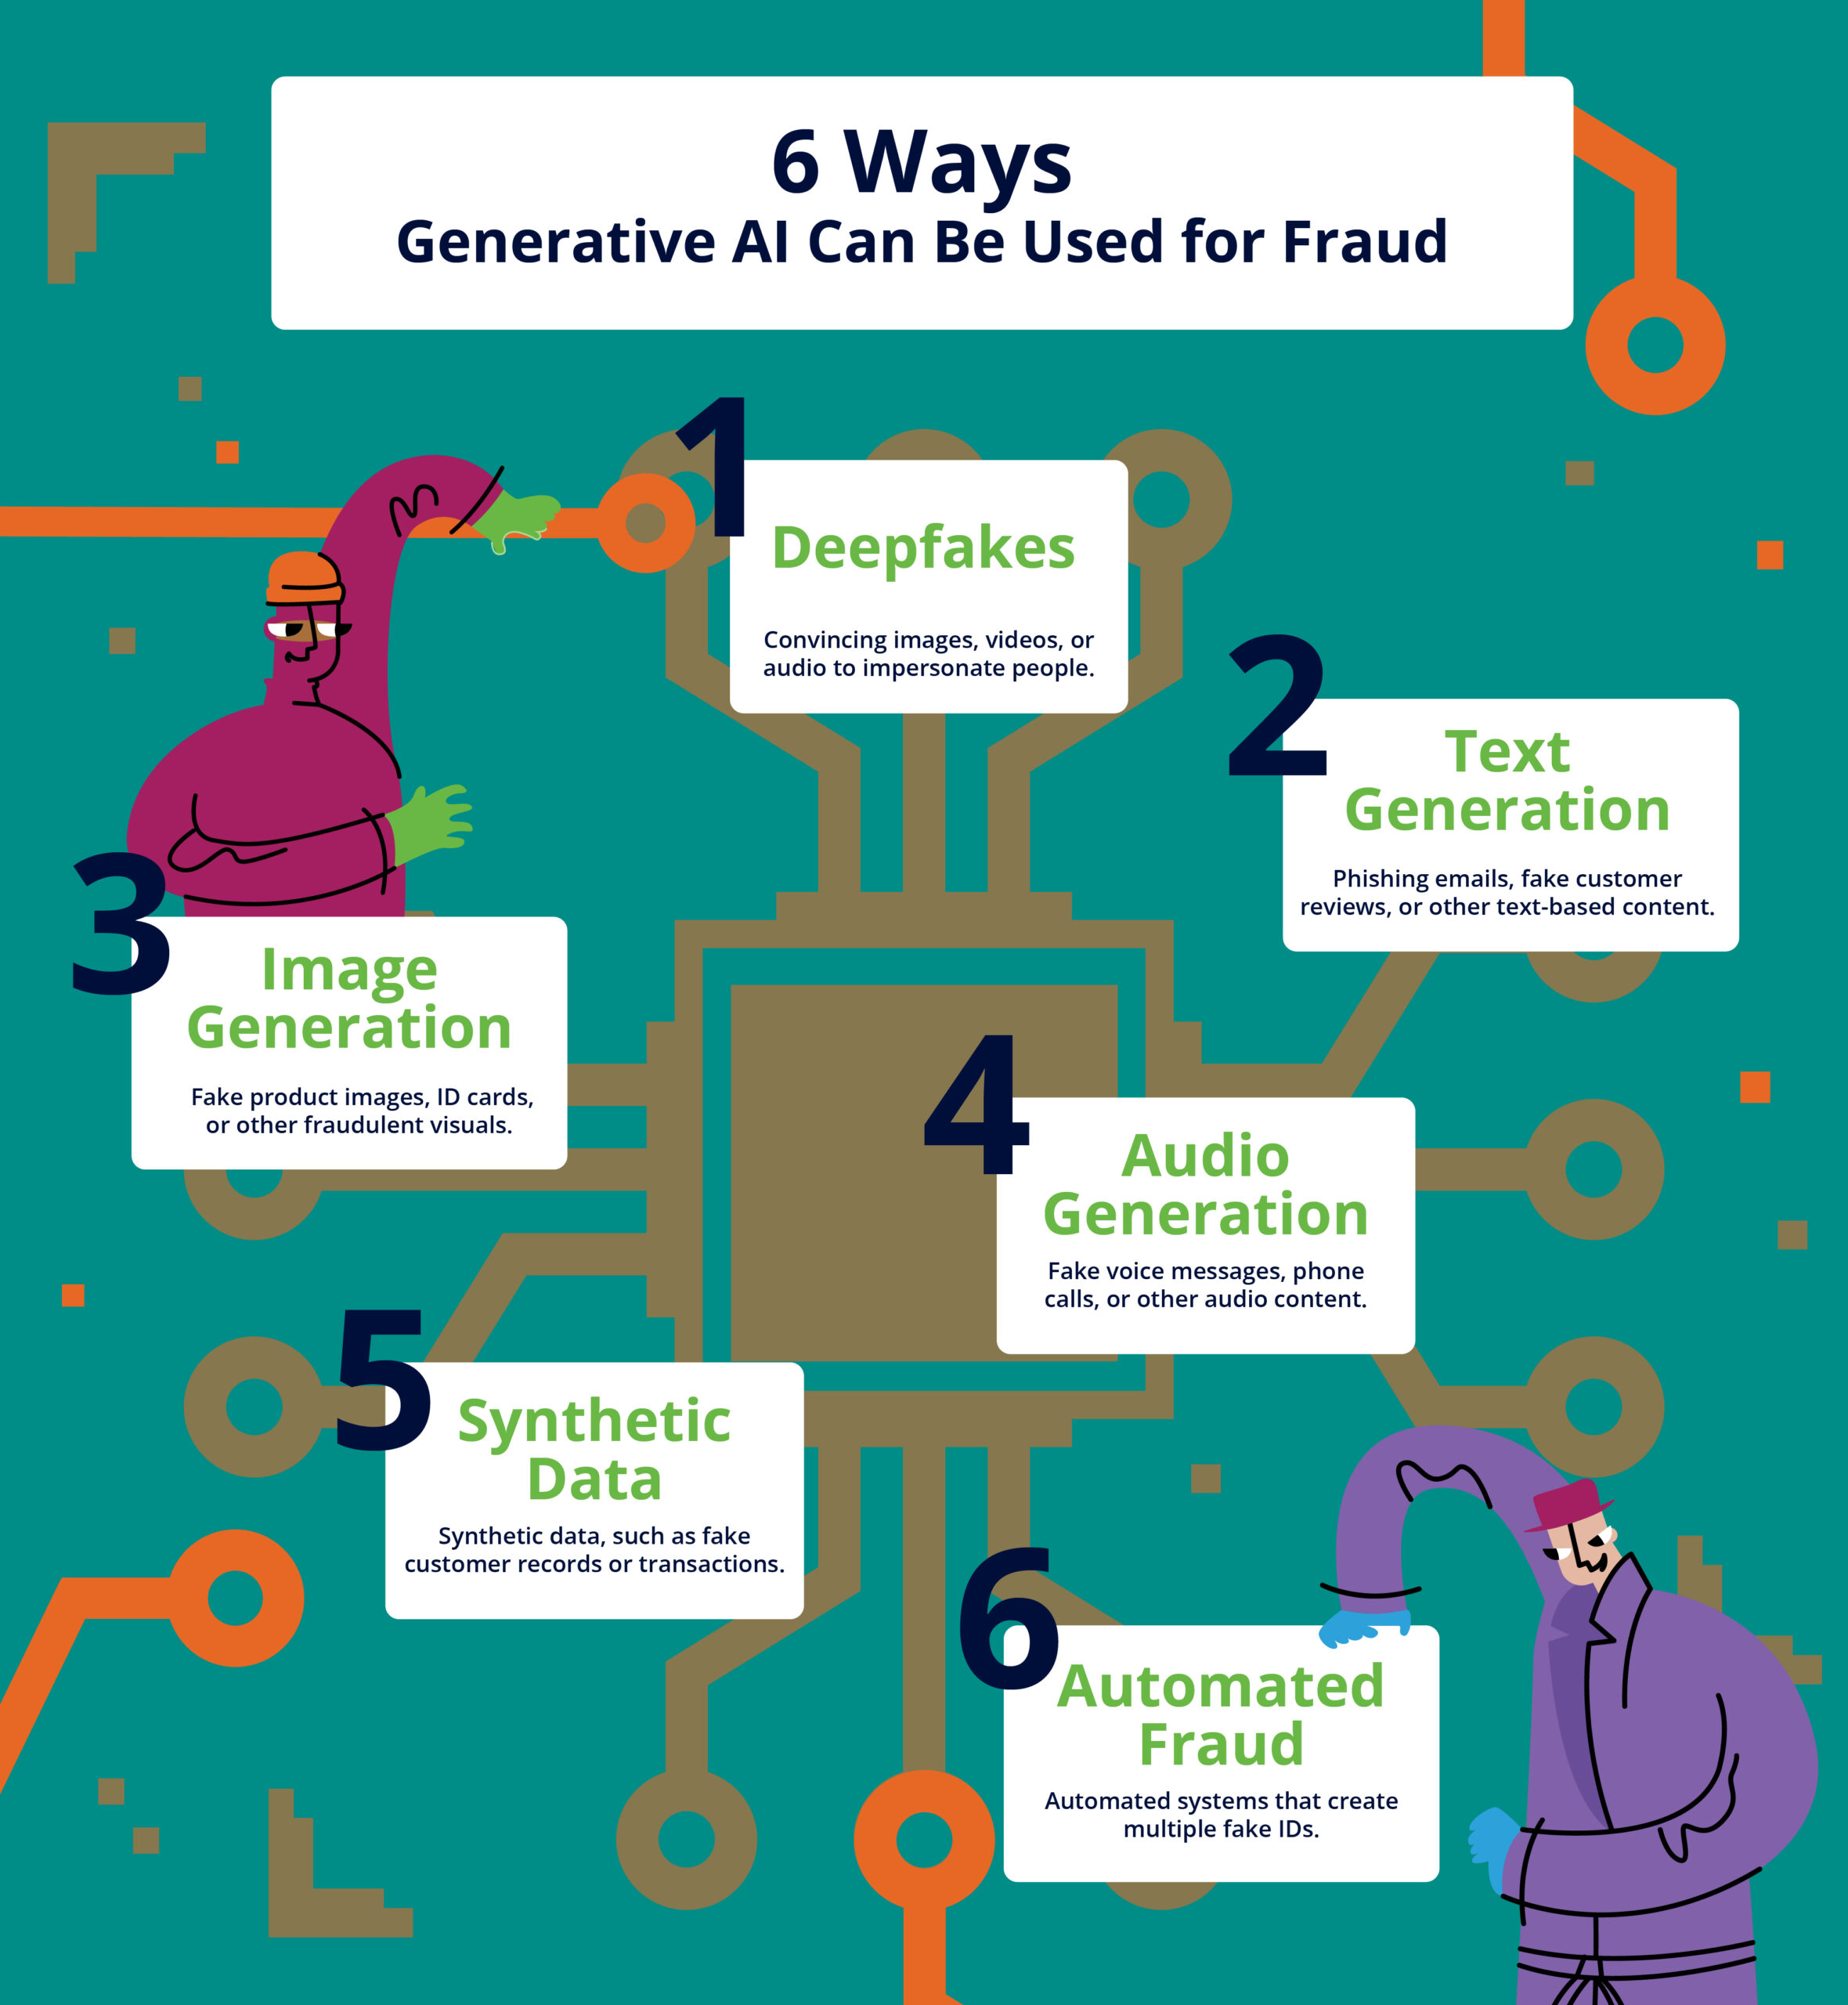 Illustration outlining 6 ways Generative AI can be used for Fraud - fraud uses cases include deepfakes, text generation, image generation, audio generation, synthetic data, and automated fraud